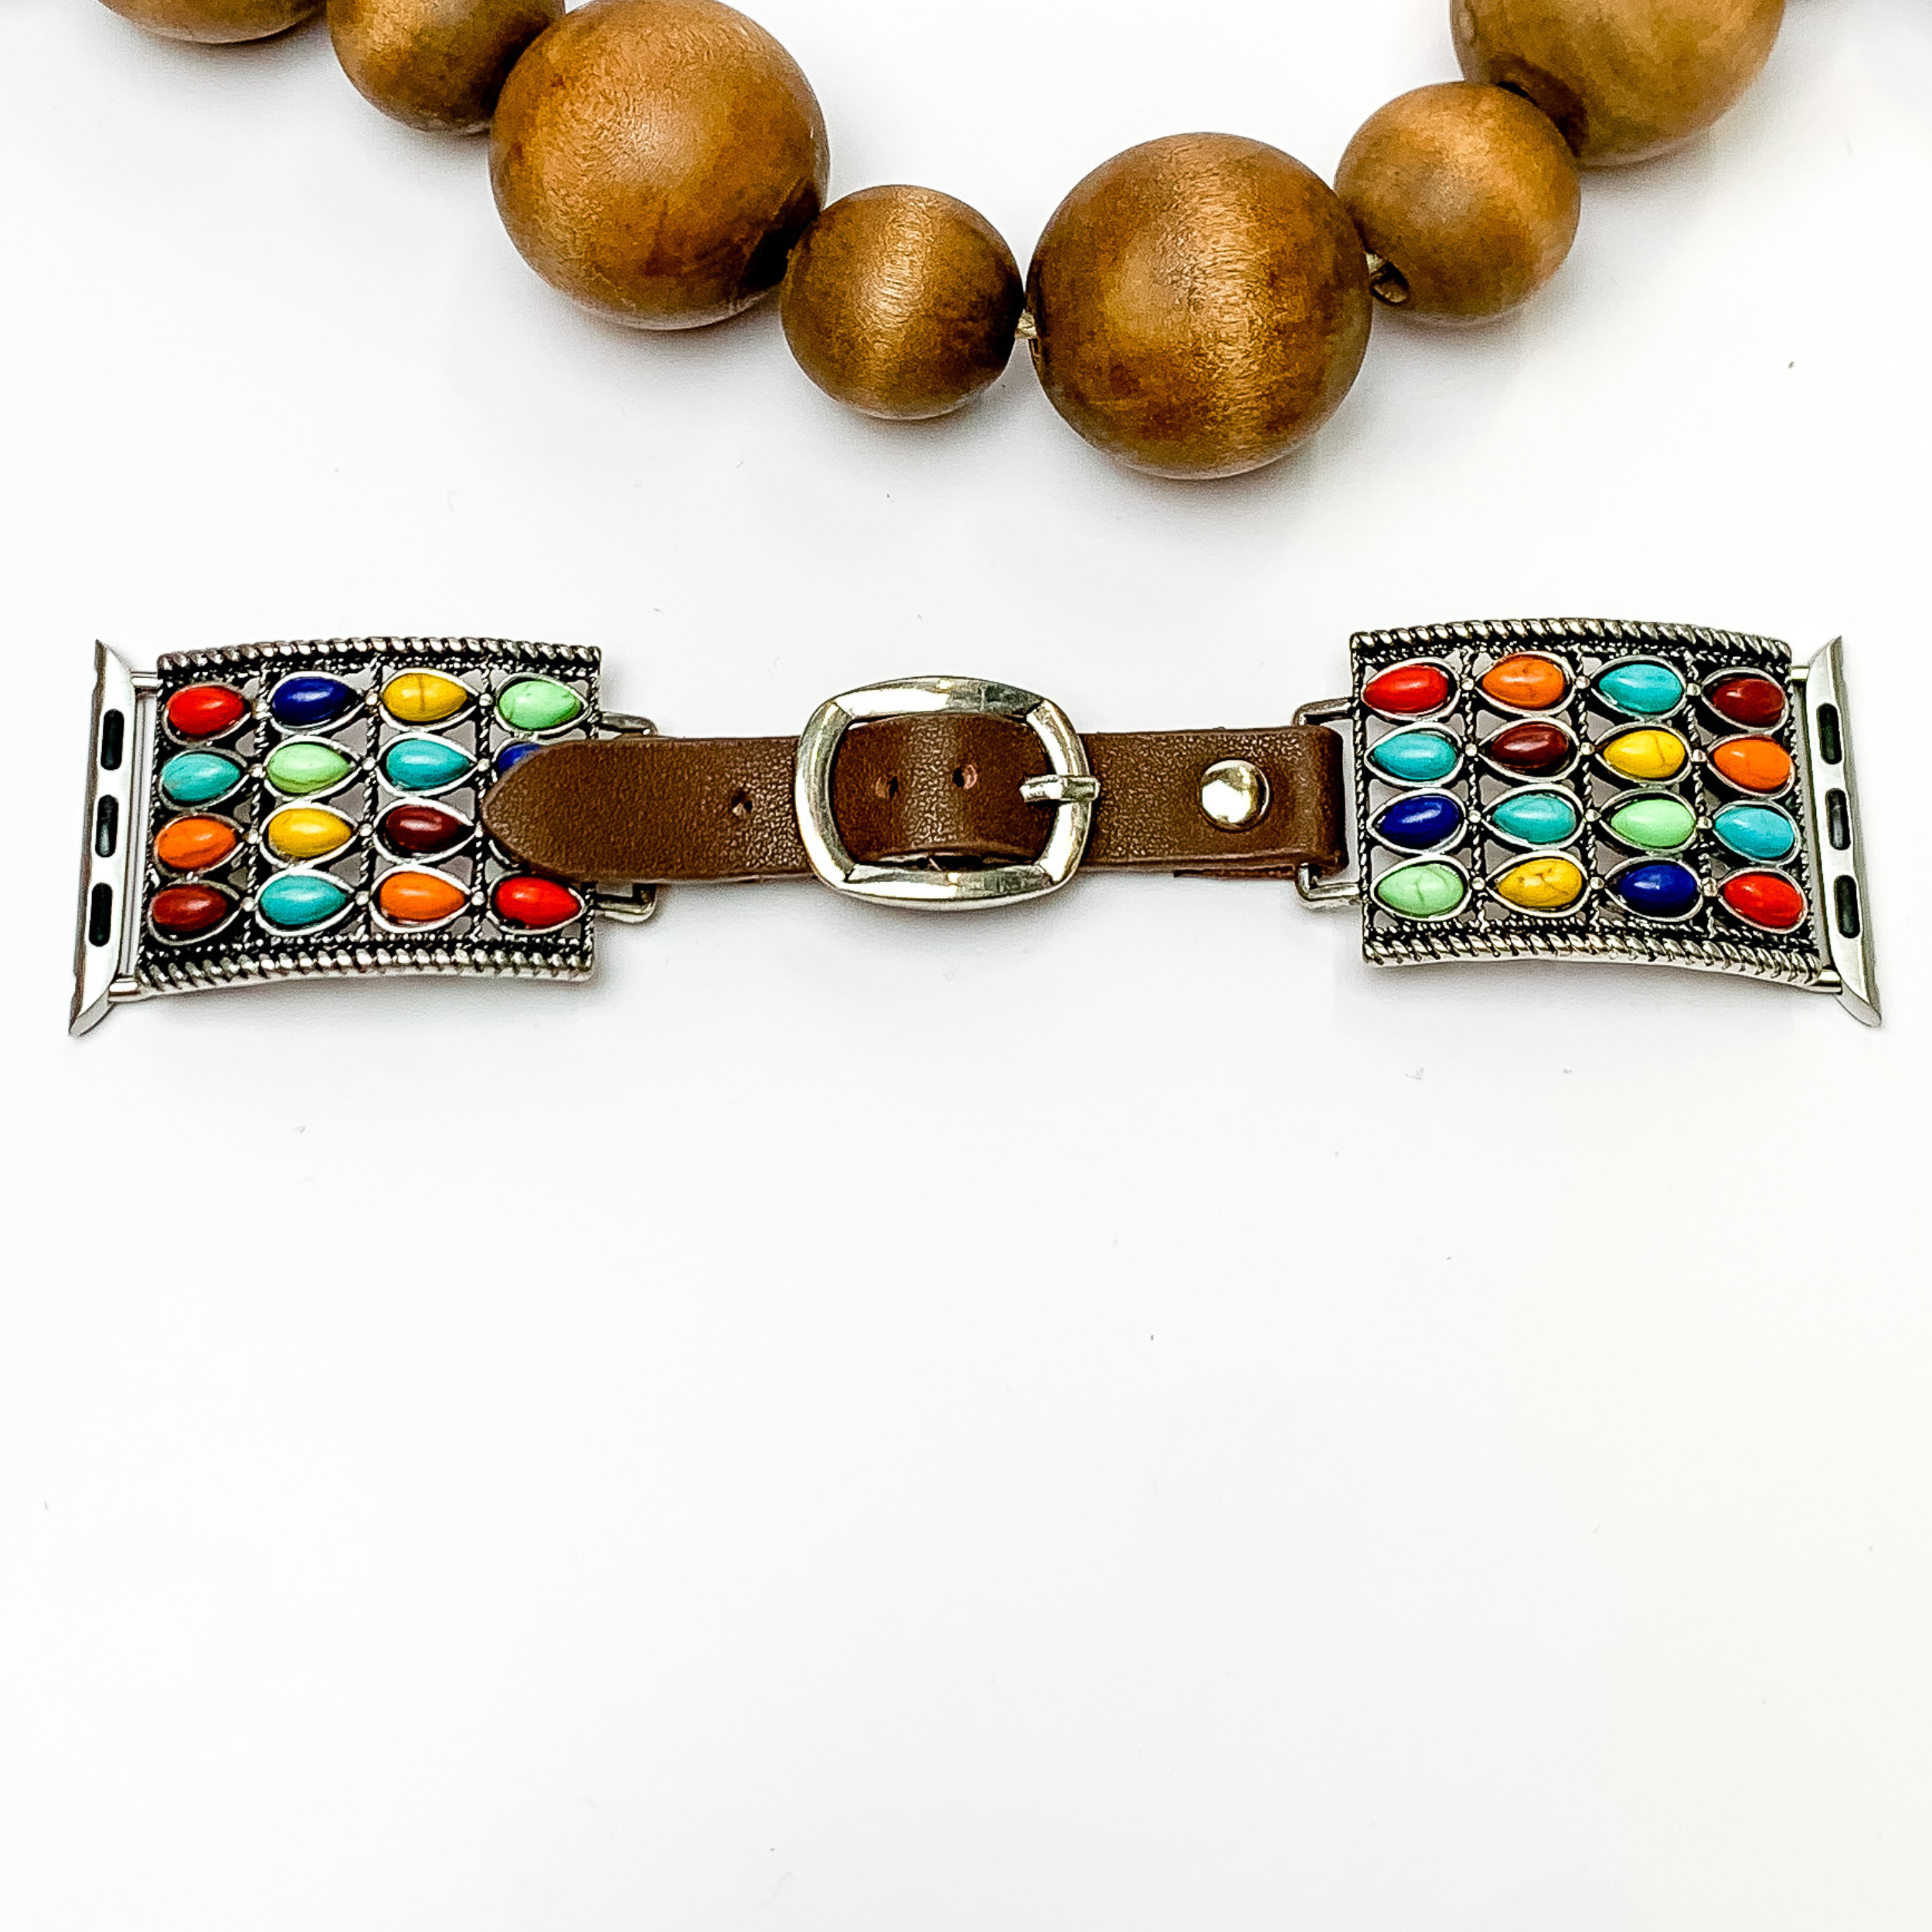  Dark Brown watch band with silver multicolor stones detail with Apple watch band acessories. The watch band has a western pendant with multiple colored stones. This watch band is pictured on a white background with wooden brown beads above the watch.